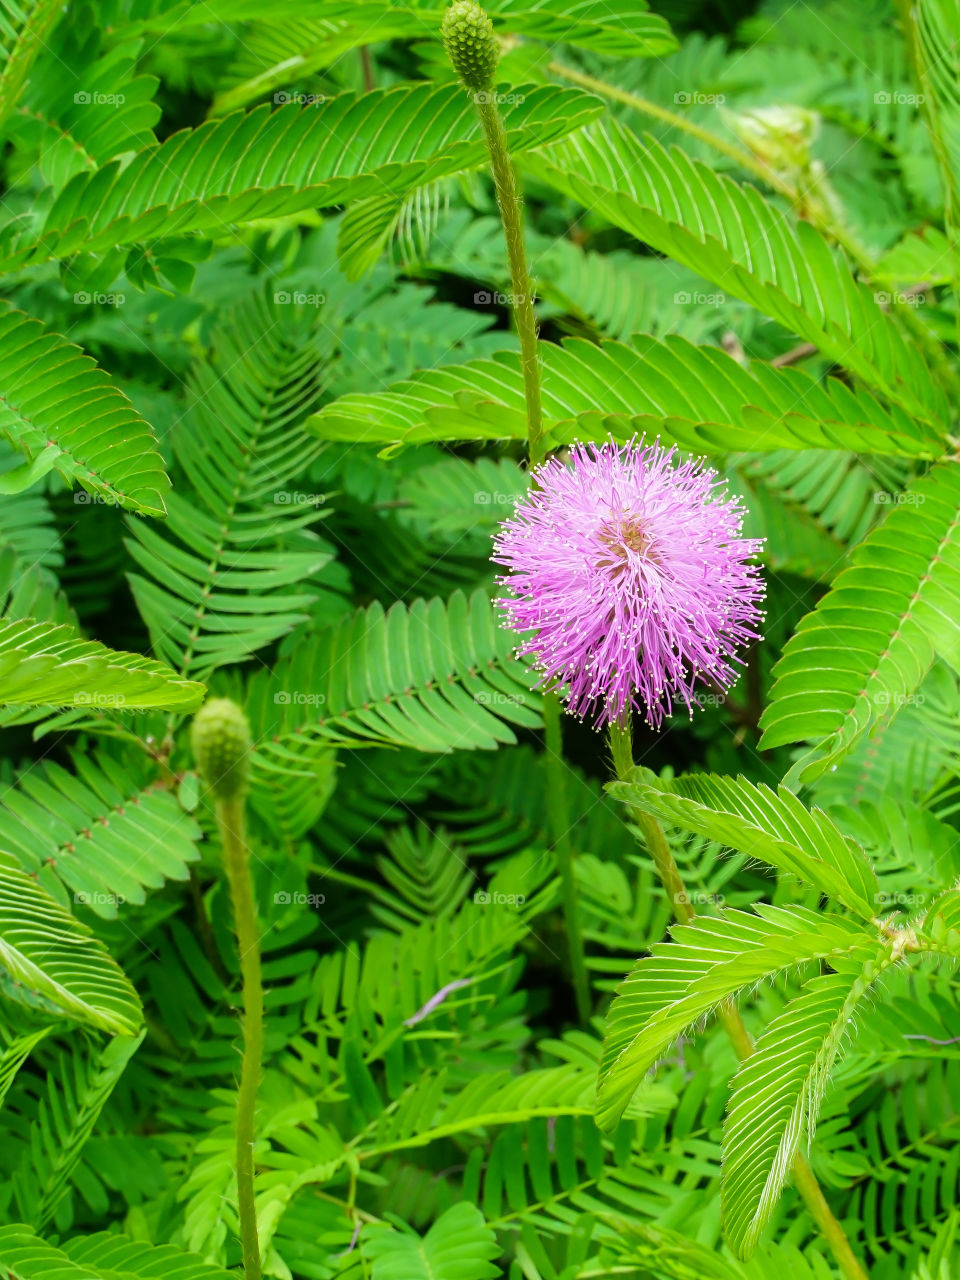 Pink Mimosa flower surrounded in green sensitive plant leaves